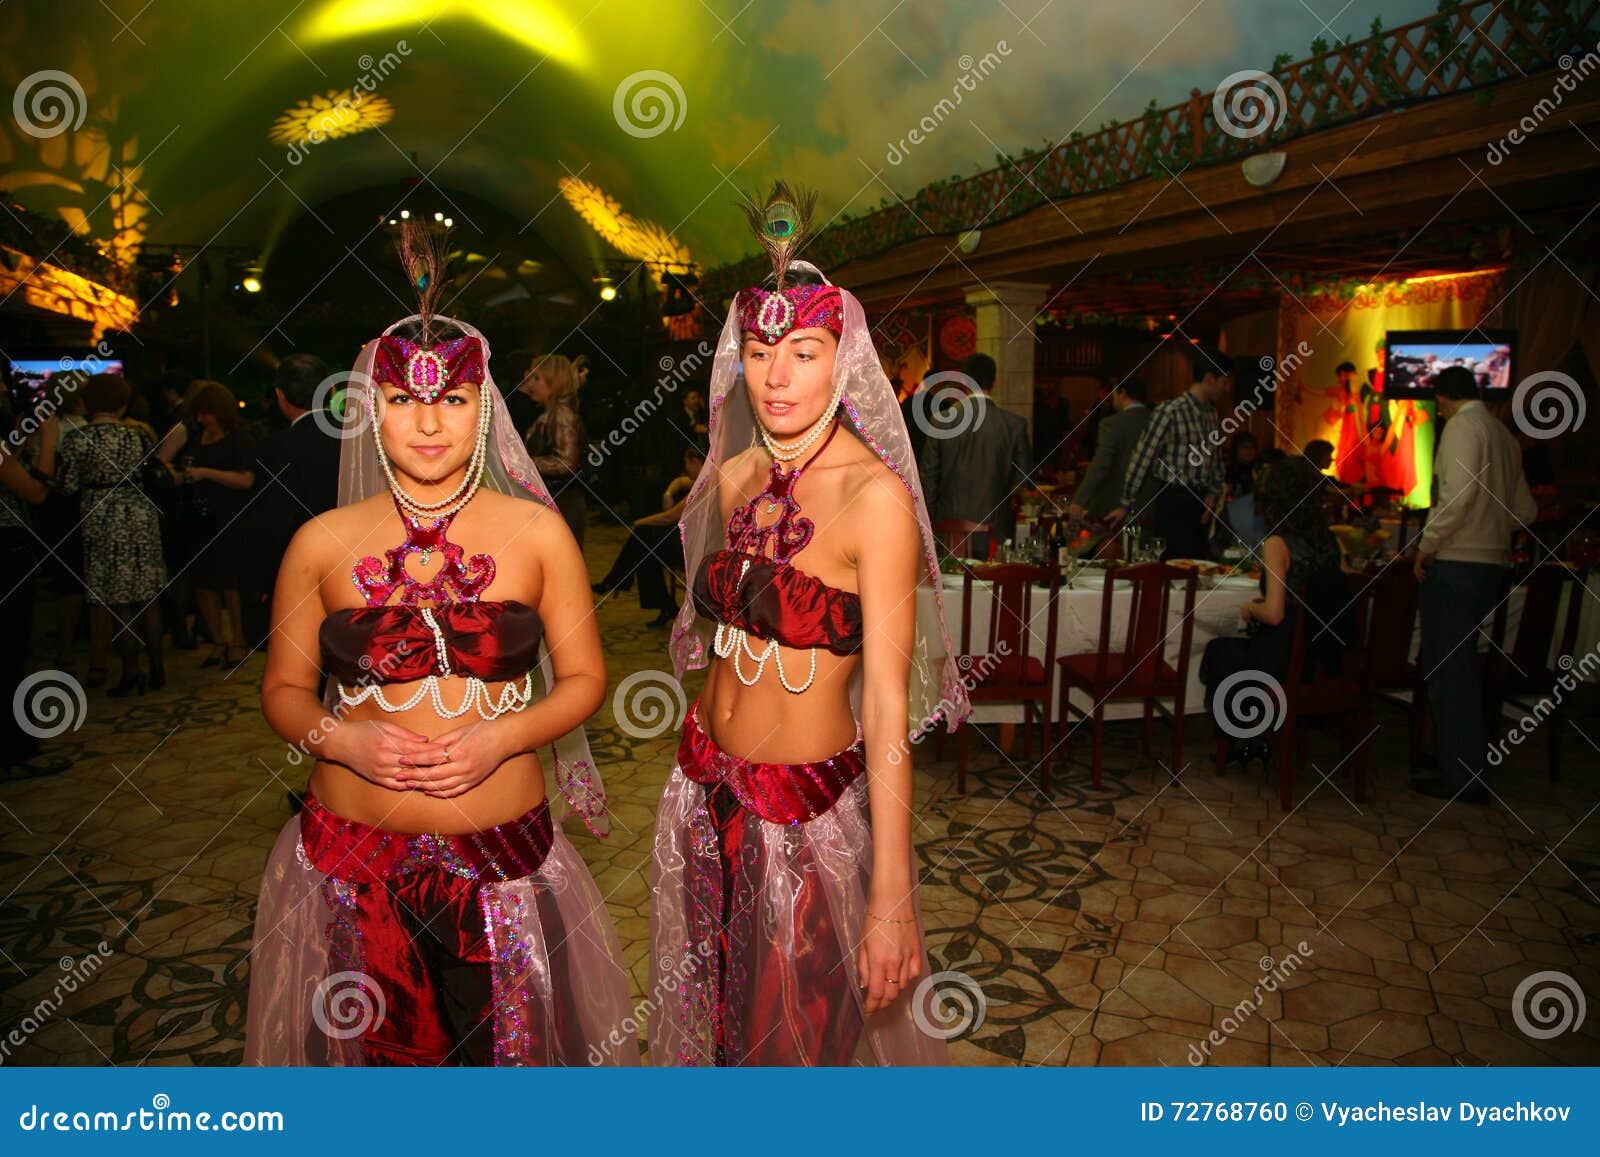 Beauty in the Sultan S Harem. Participants Dancing Show in Oriental Costumes. Editorial Image Image of dancer, costume: 72768760